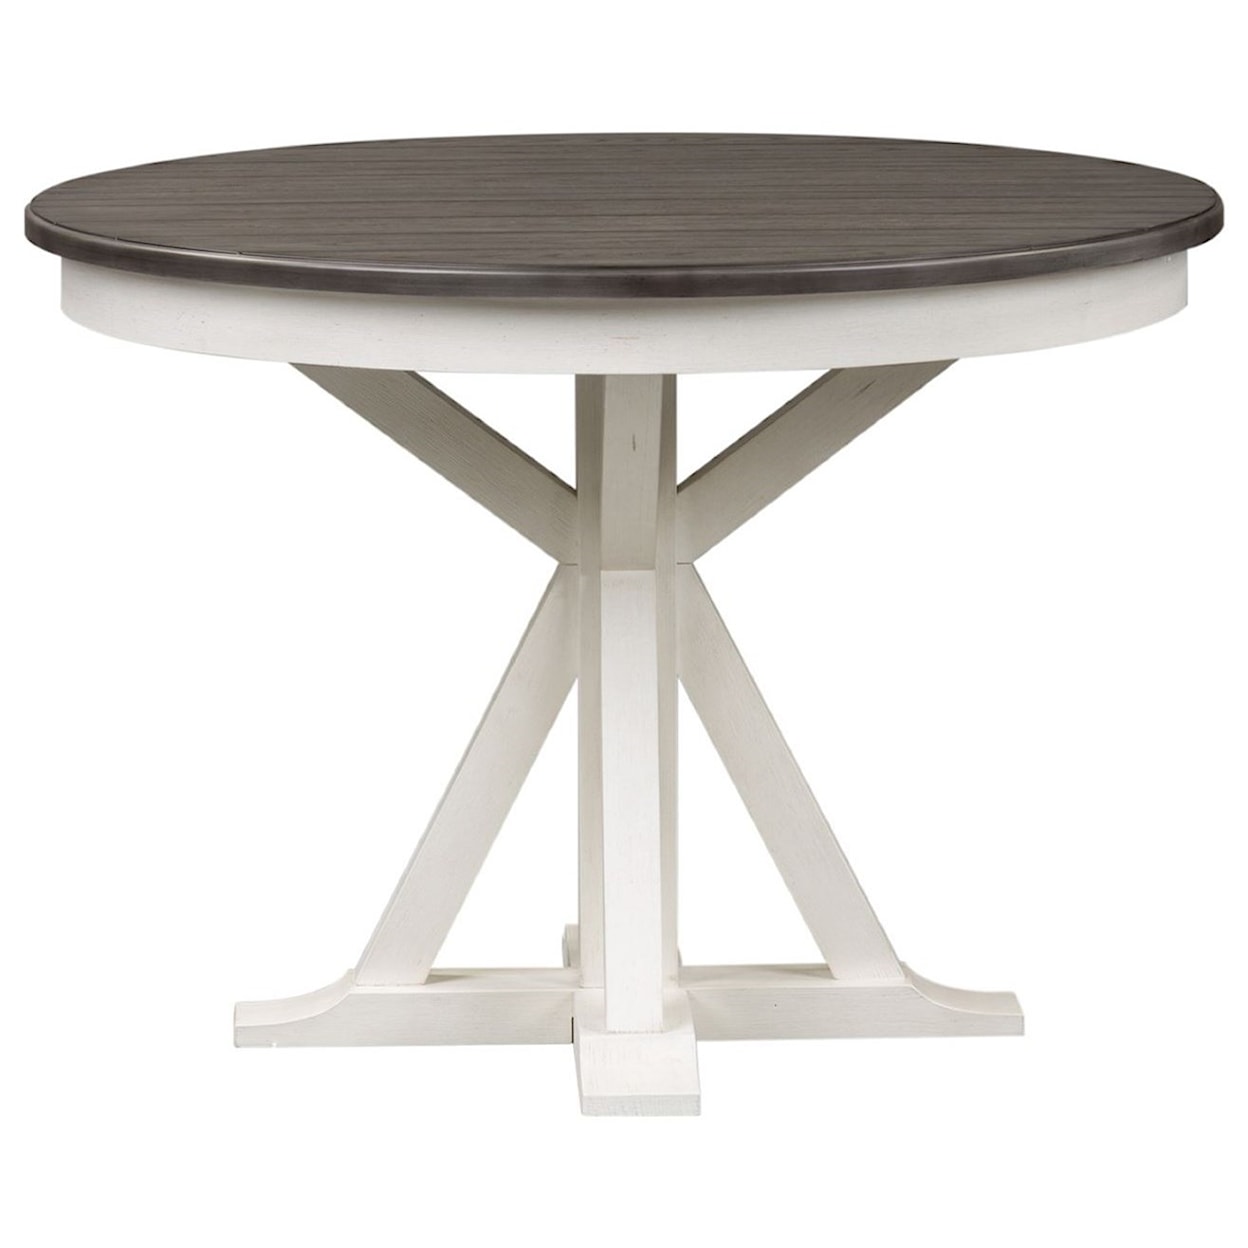 Liberty Furniture Allyson Park Round Dining Room Table